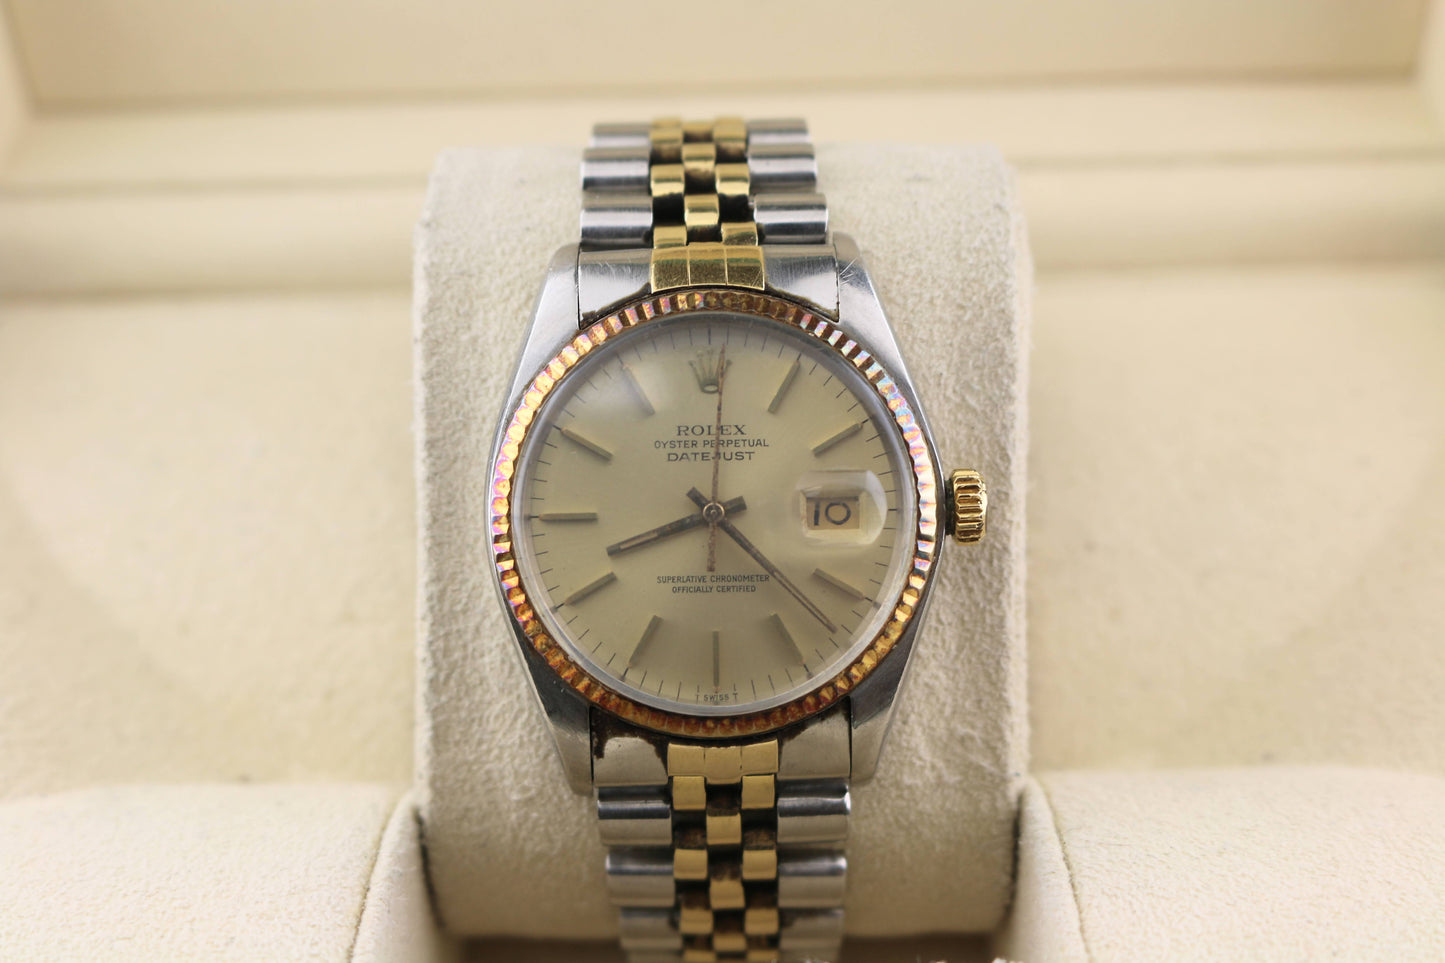 1978 Rolex Datejust 16013 Champagne Dial TT Jubilee No Papers 36mm